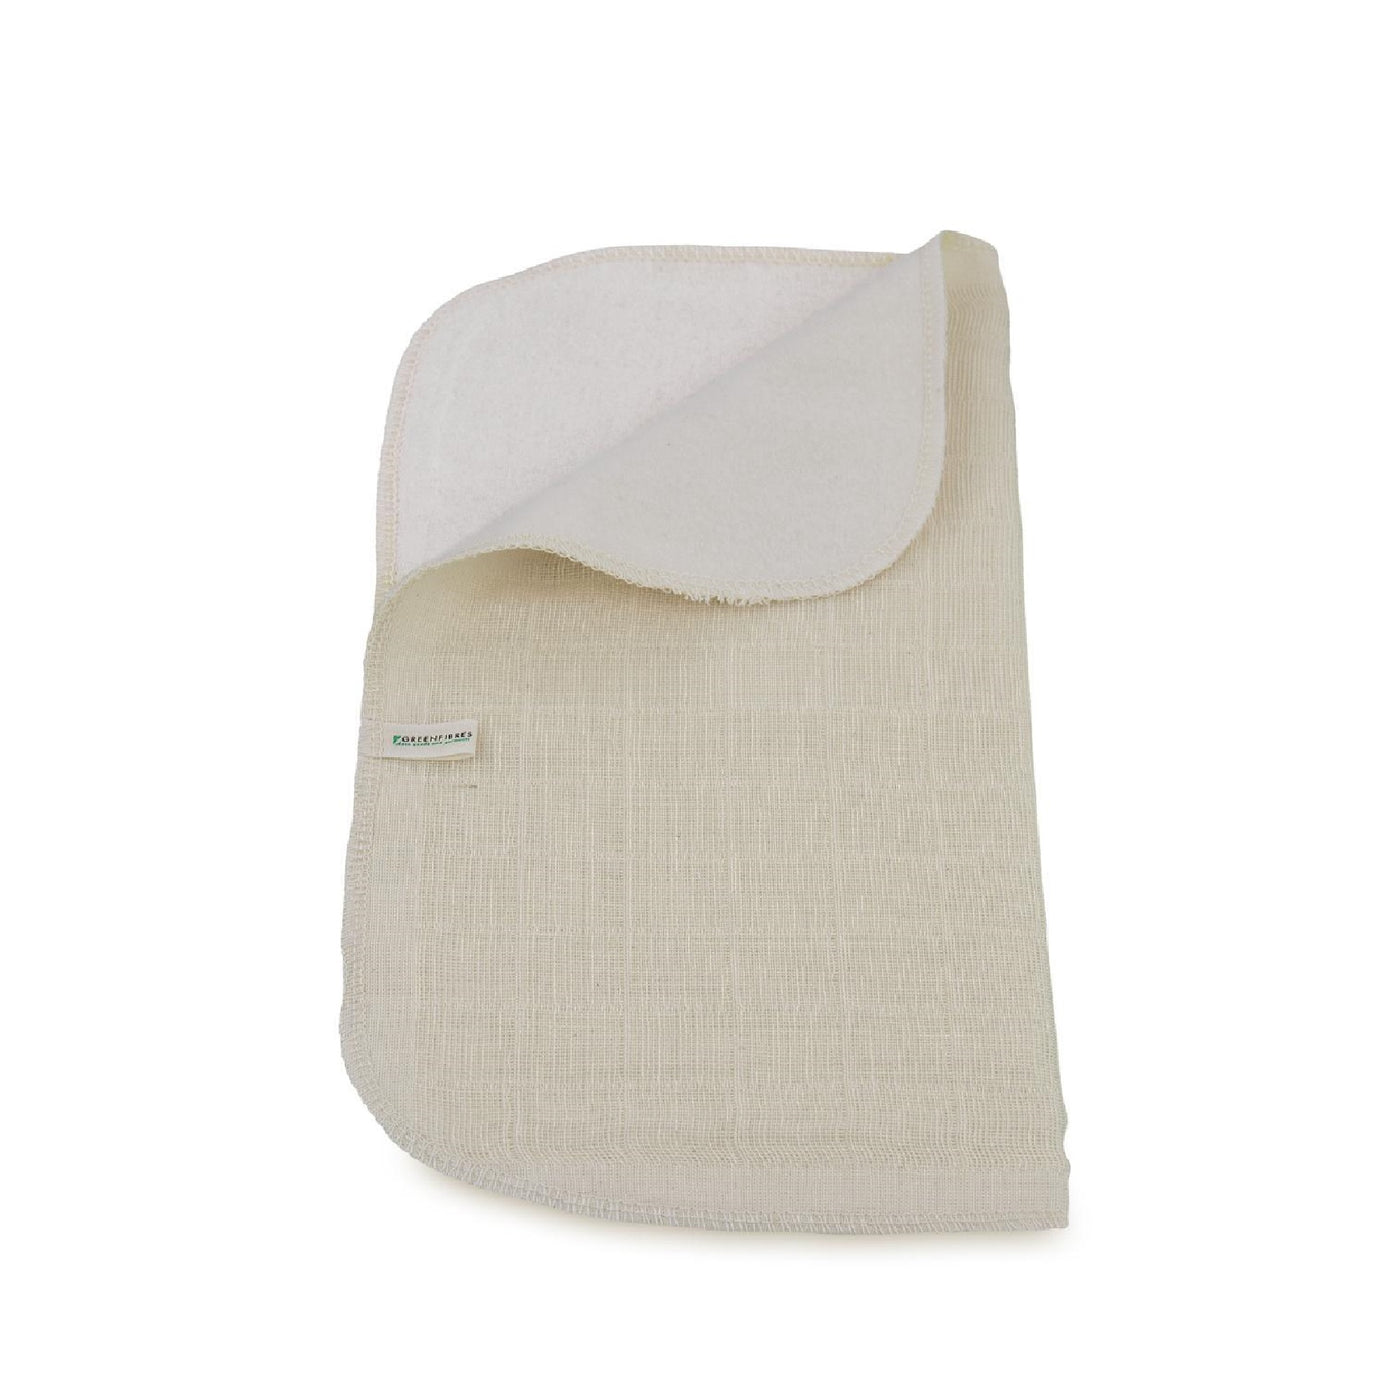 Greenfibres Organic Two-Sided Cotton Face Cloth